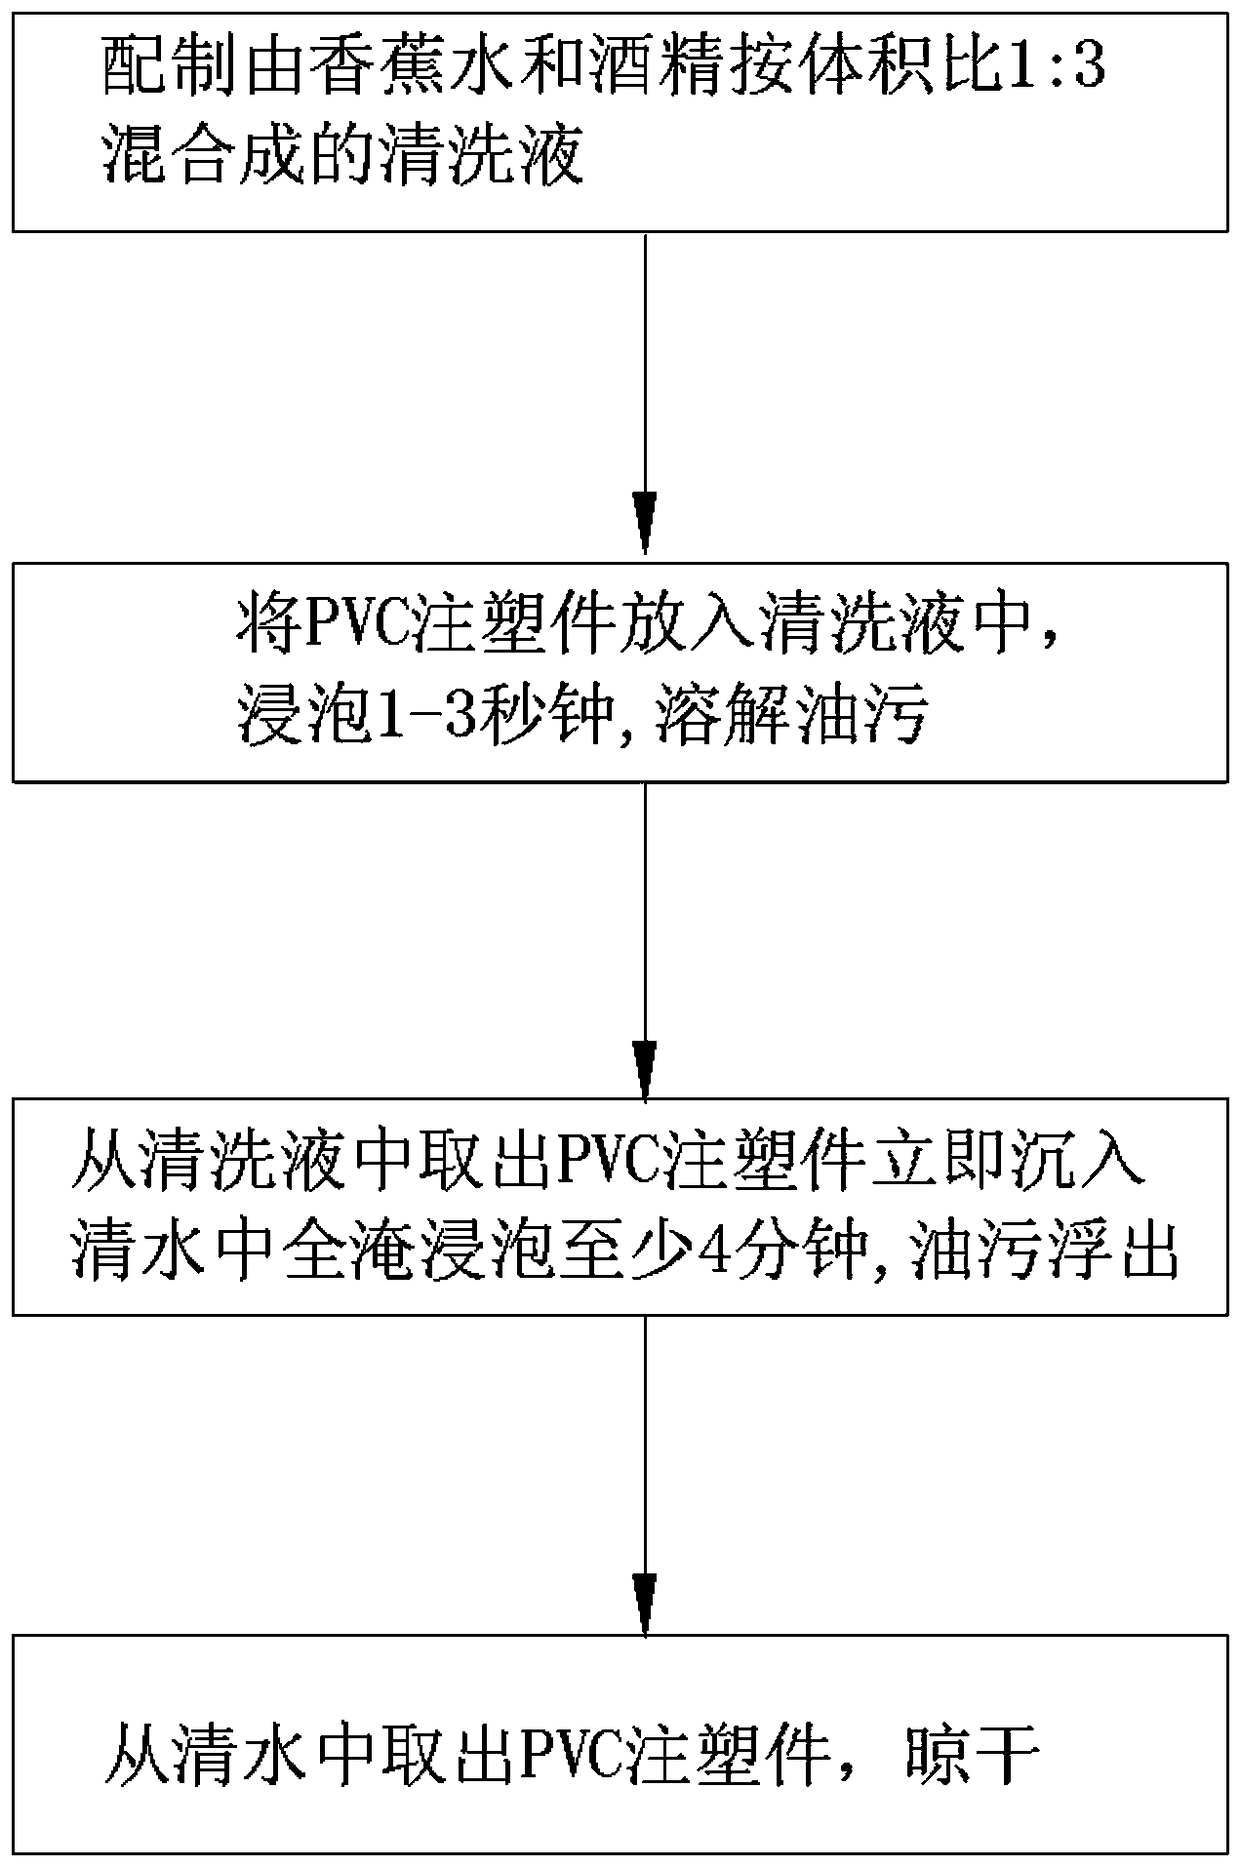 Cleaning solution and cleaning treatment method for preventing low-hardness pvc injection molded parts from spraying paint